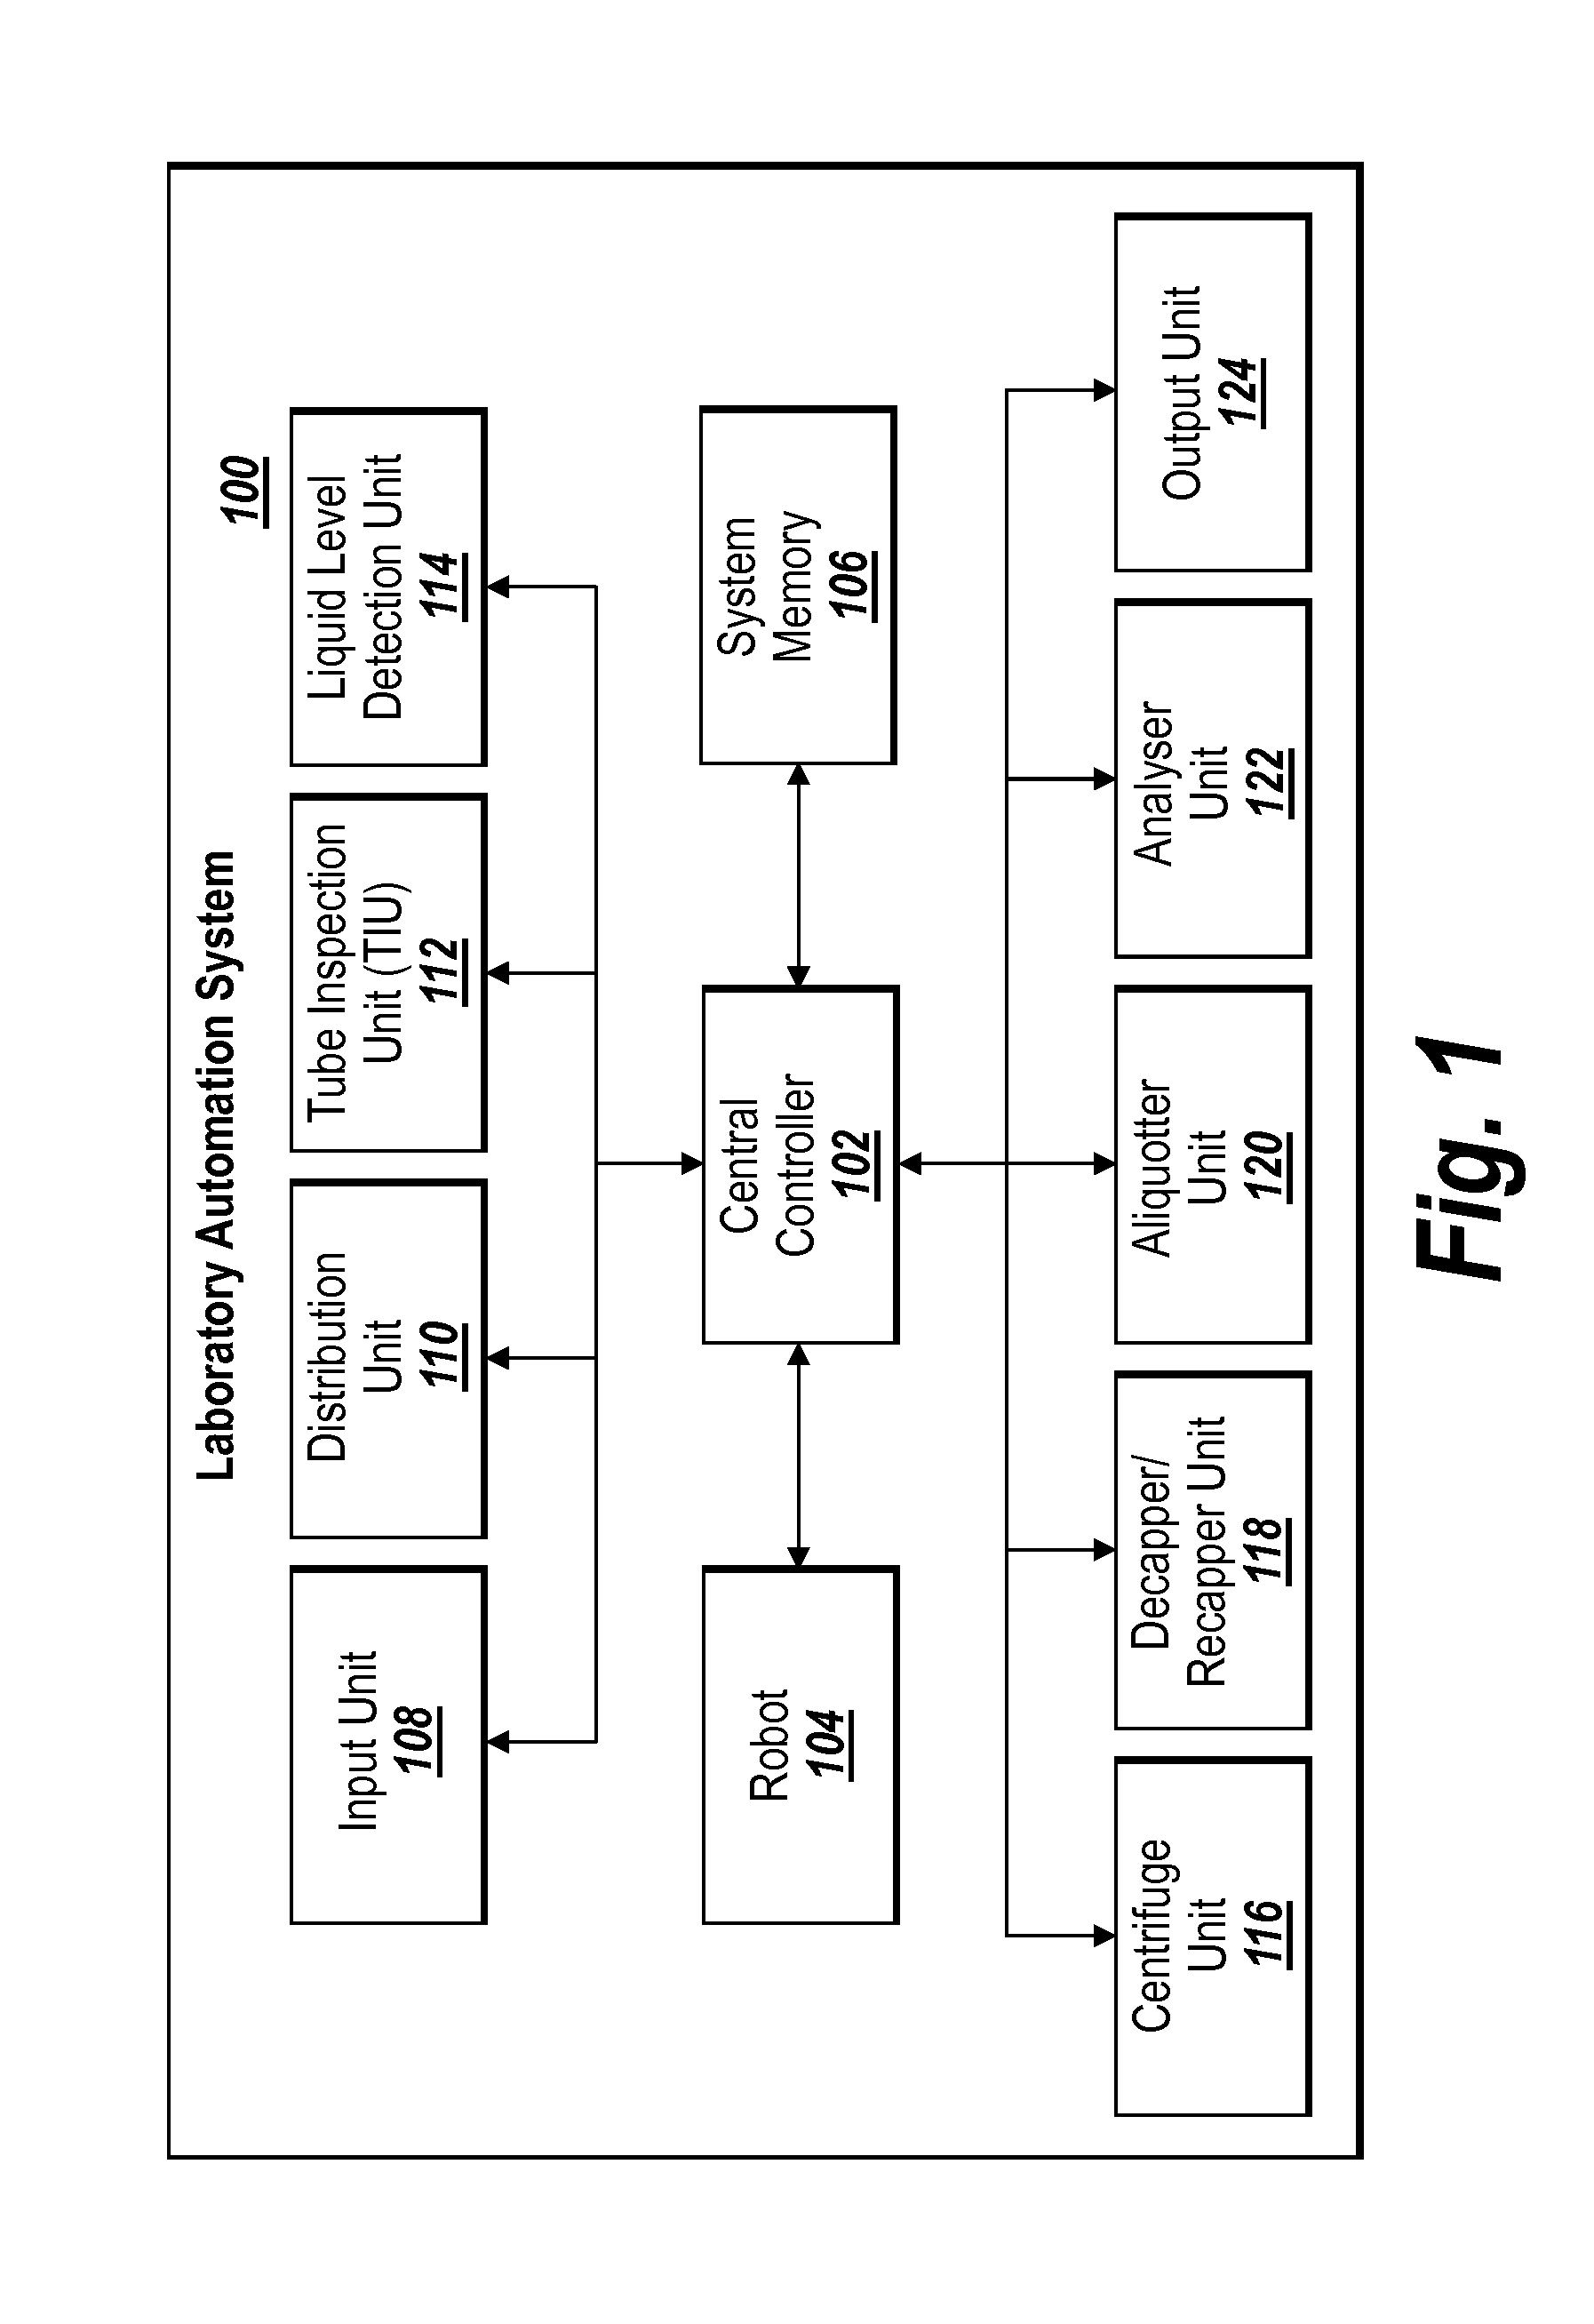 Methods and systems for tube inspection and liquid level detection